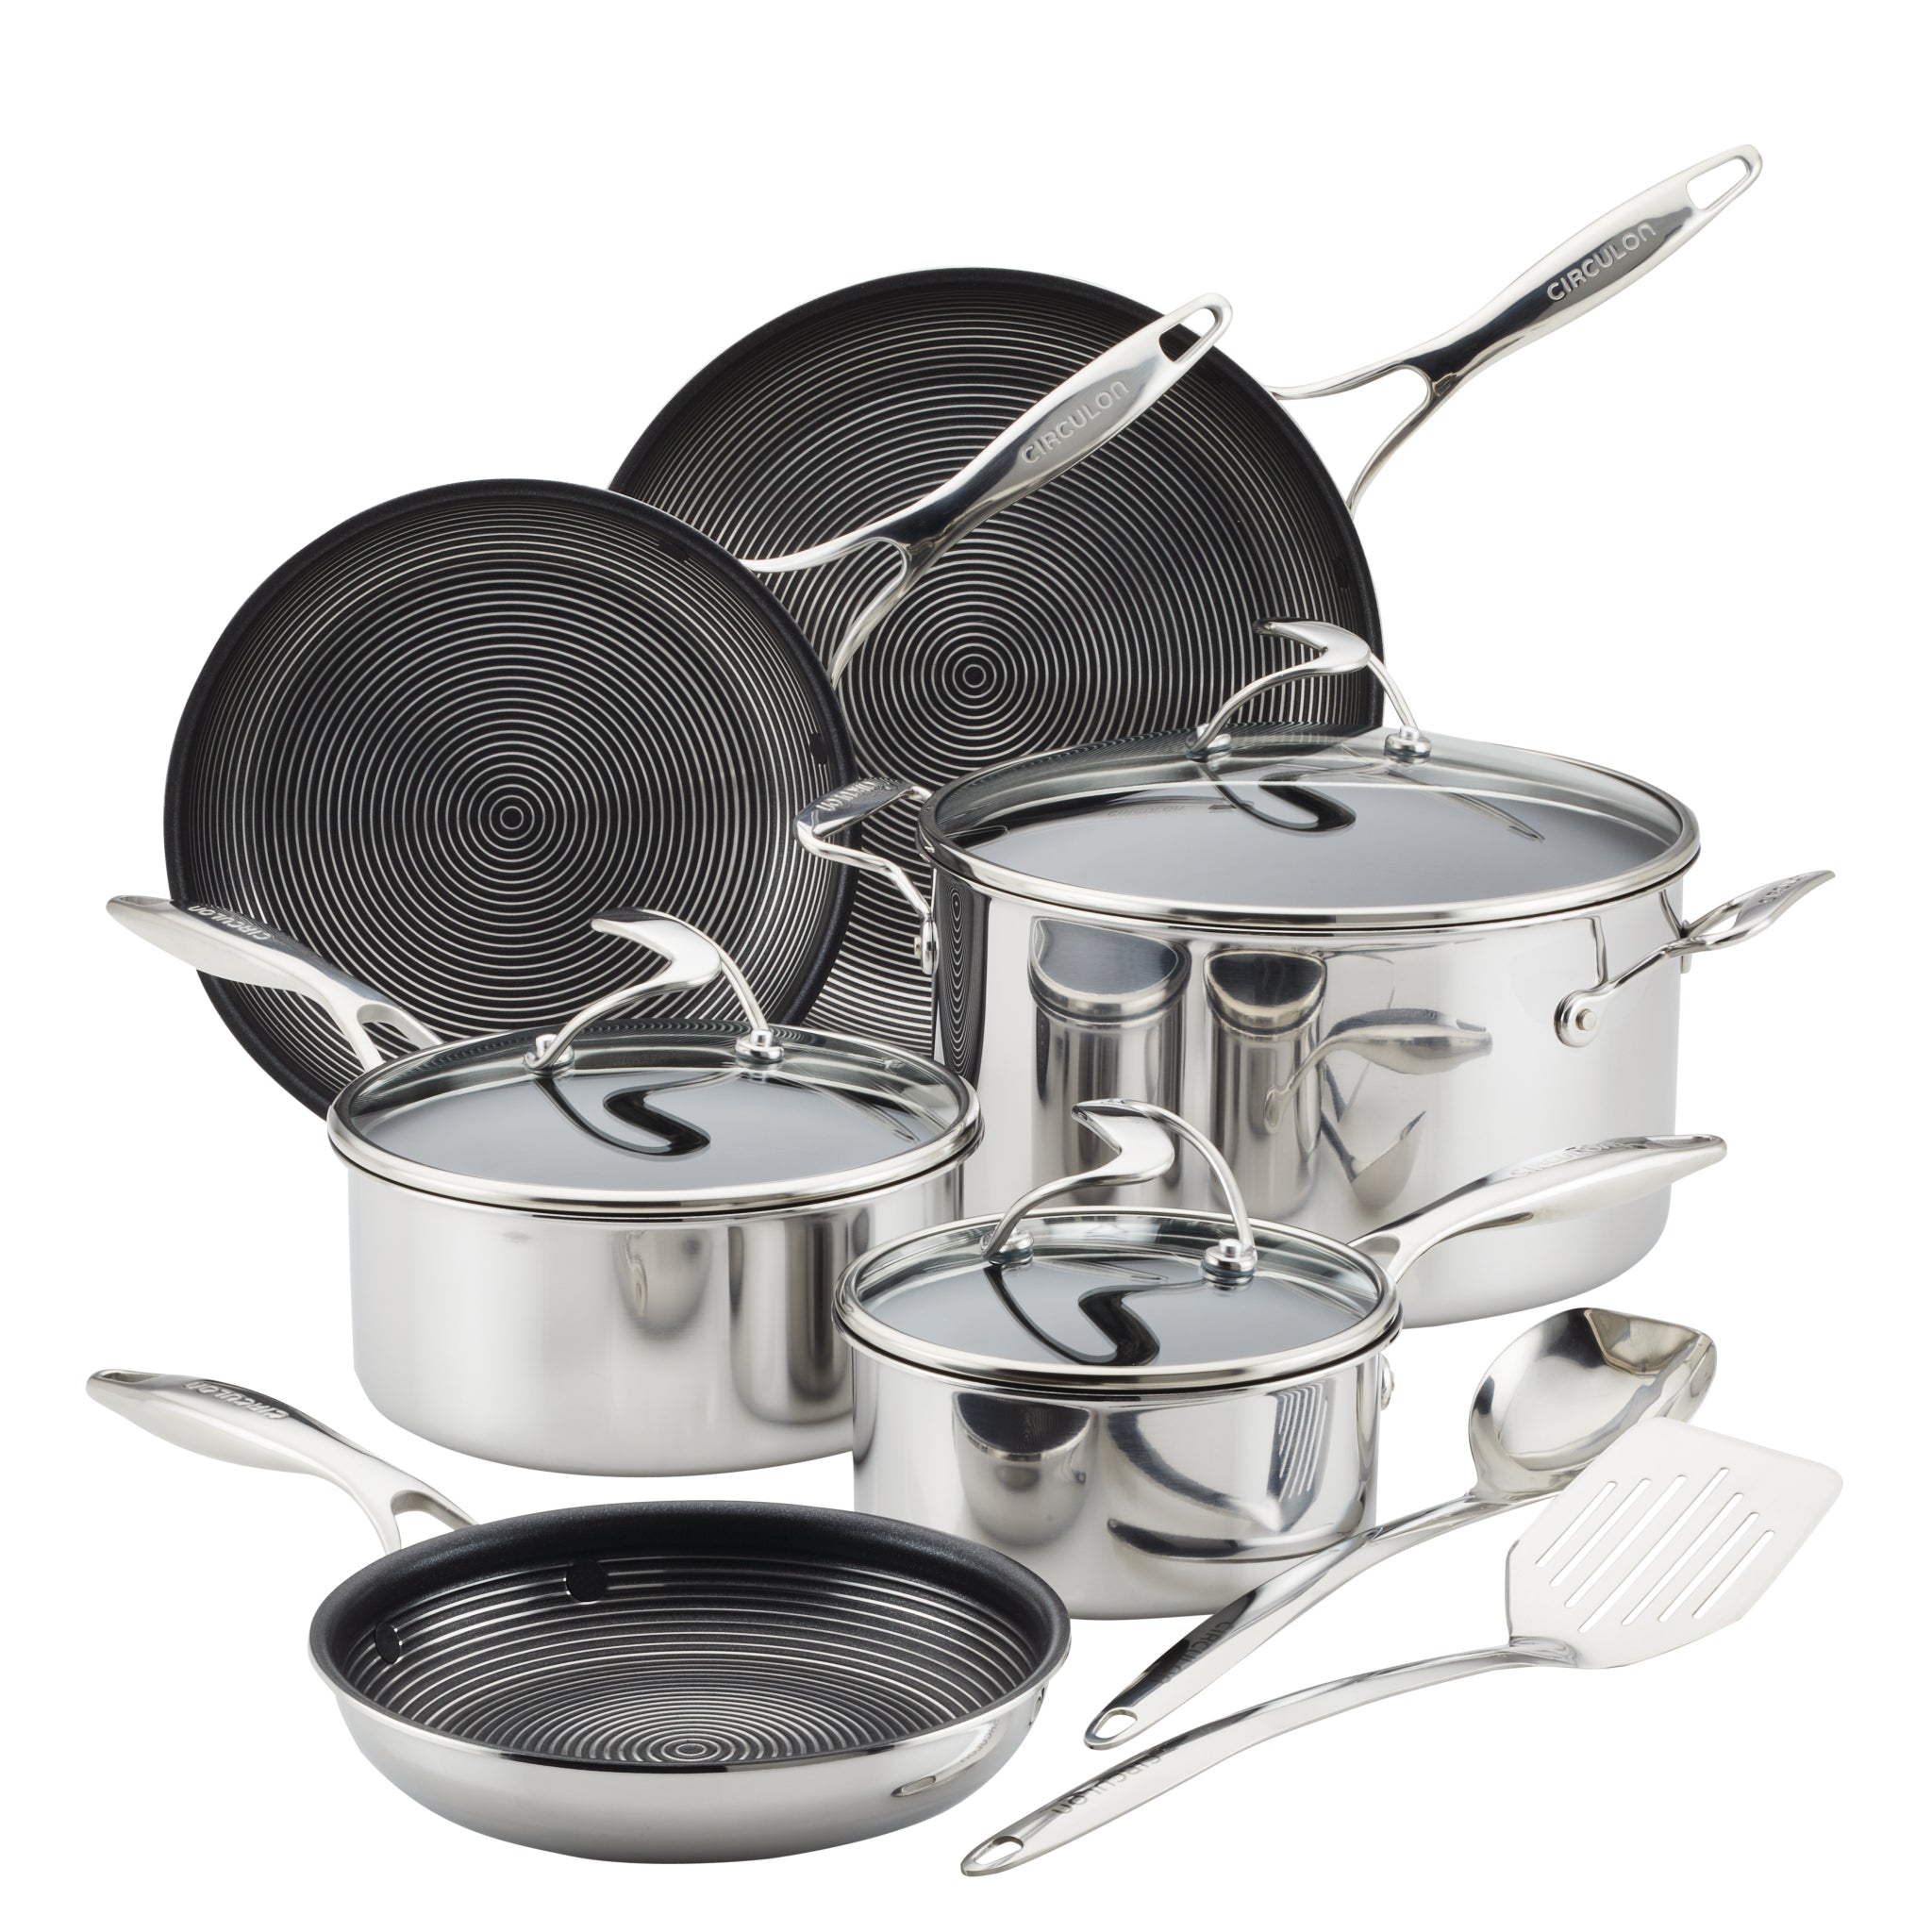 11-Piece Clad Stainless Steel and Hybrid Nonstick Cookware Set – Circulon